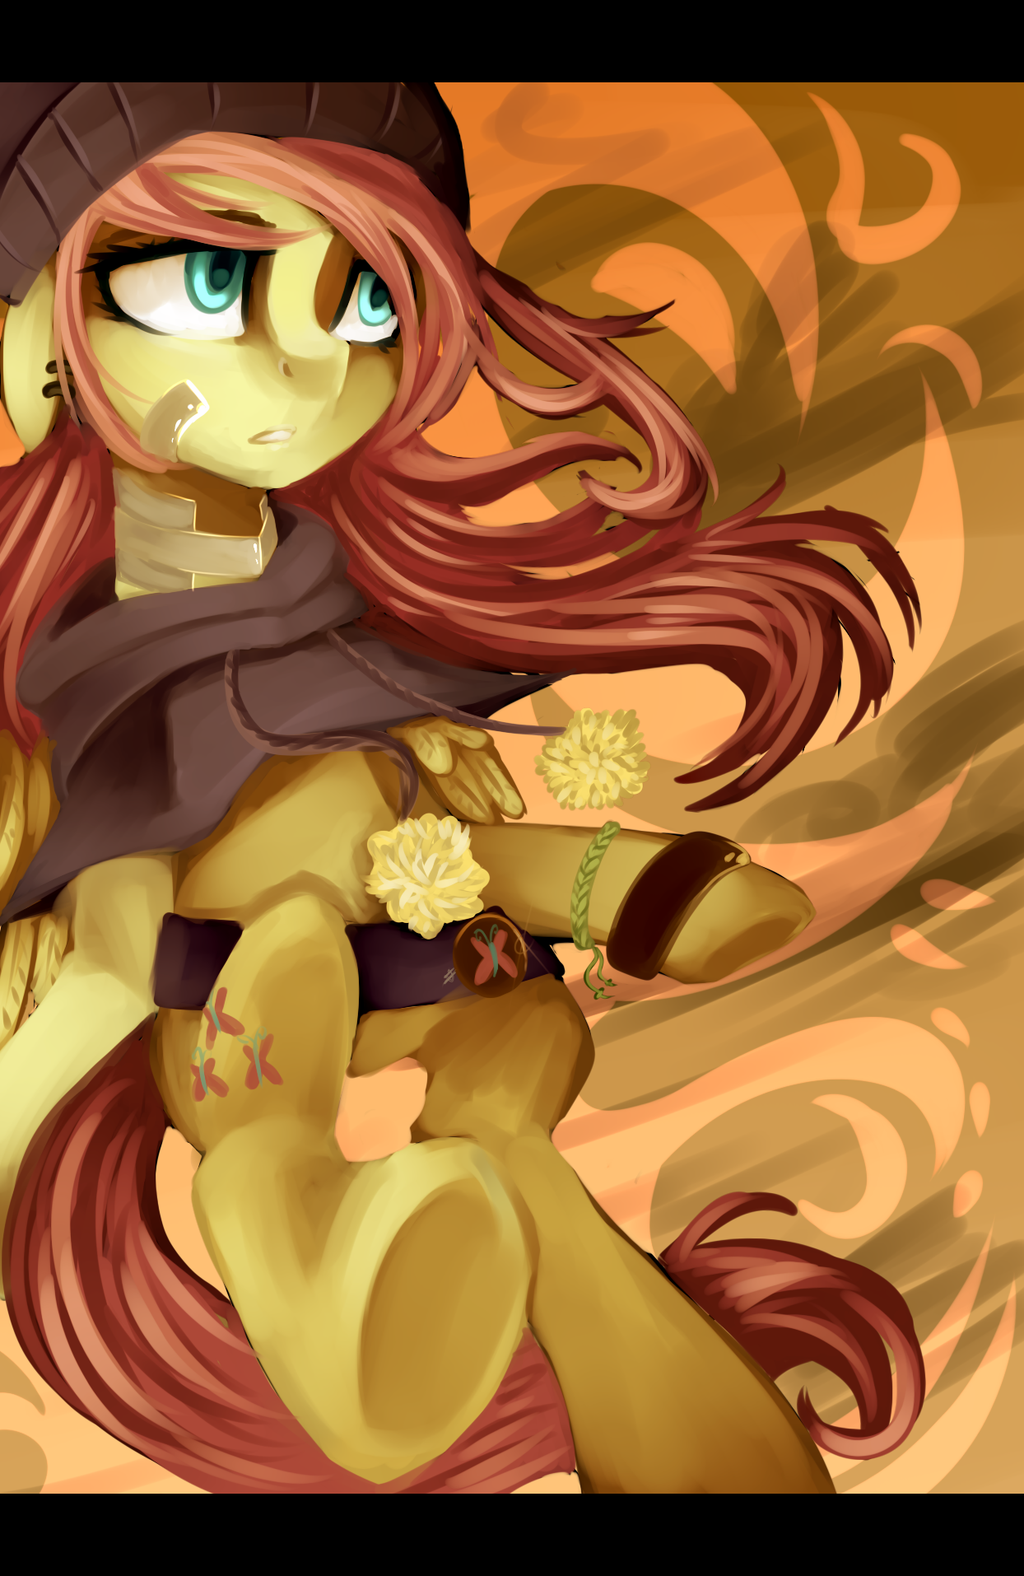 with_a_spirit_by_kmrshy-d7dvtm6.png